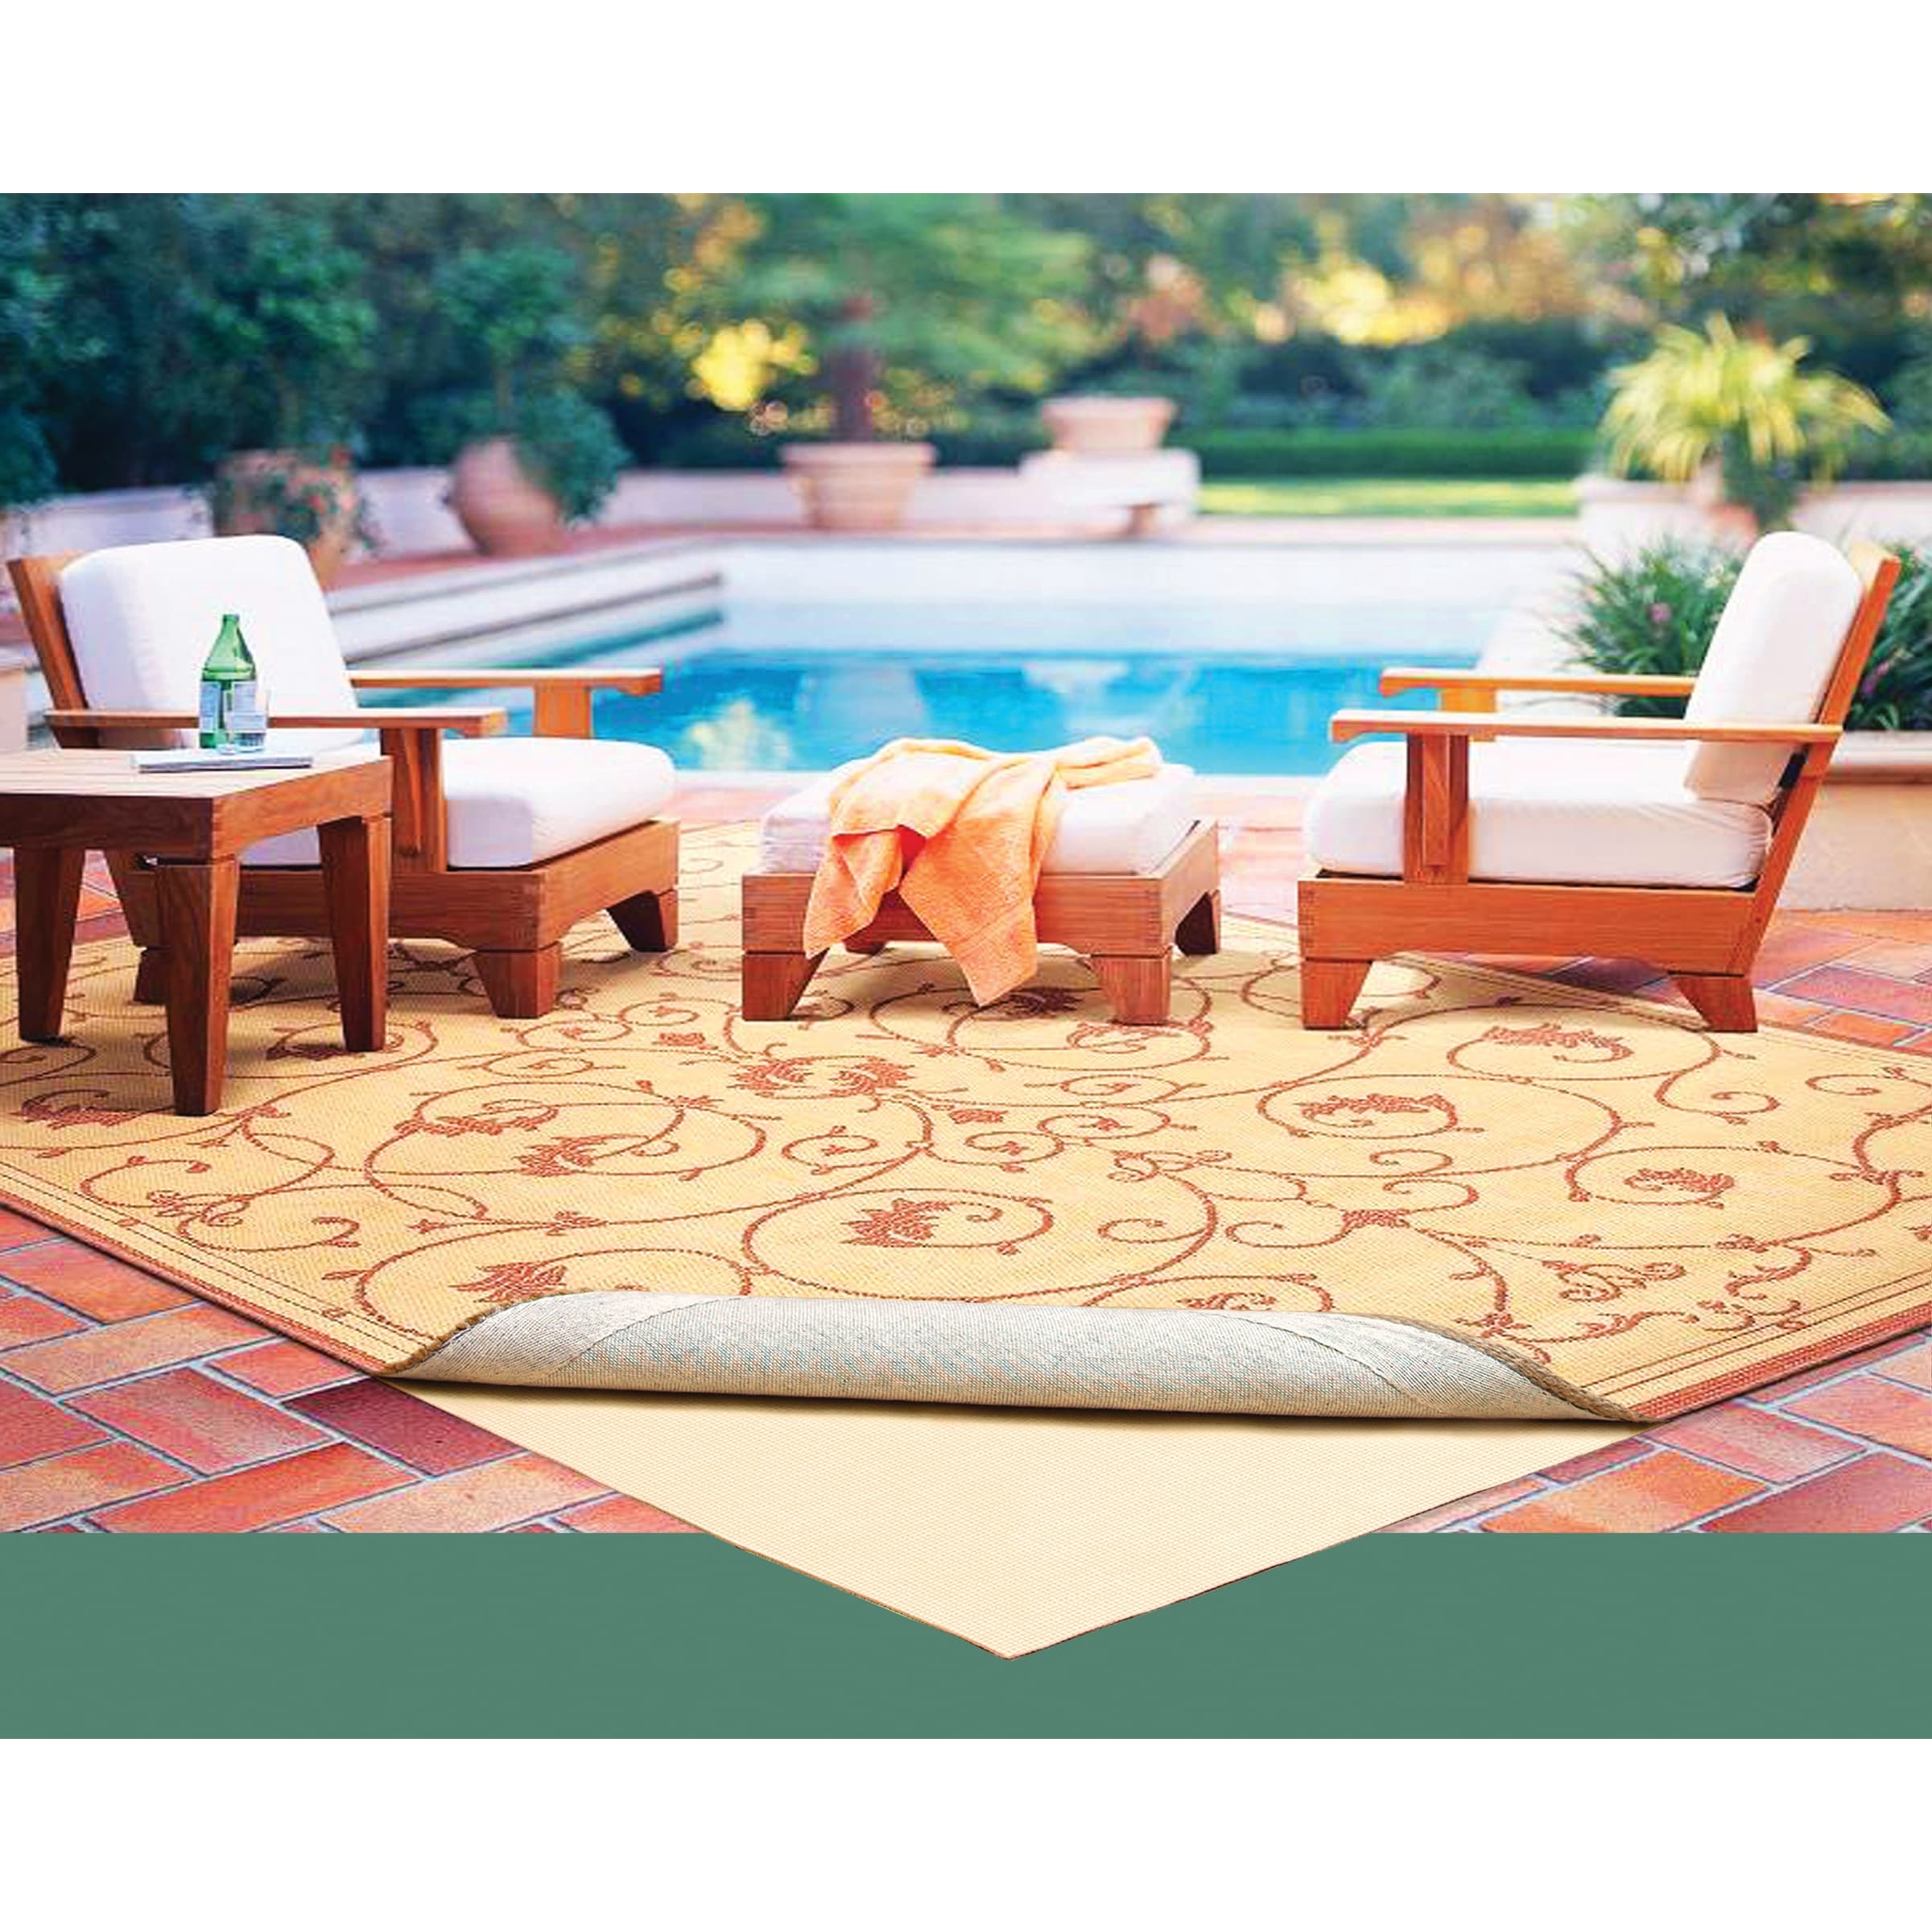 https://ak1.ostkcdn.com/images/products/is/images/direct/79ae6ee2e8c6a00e206e98315d763ef6102e920b/Con-Tact-Brand-Eco-Grip-Non-slip-Rug-Pad-90-inch-Round.jpg